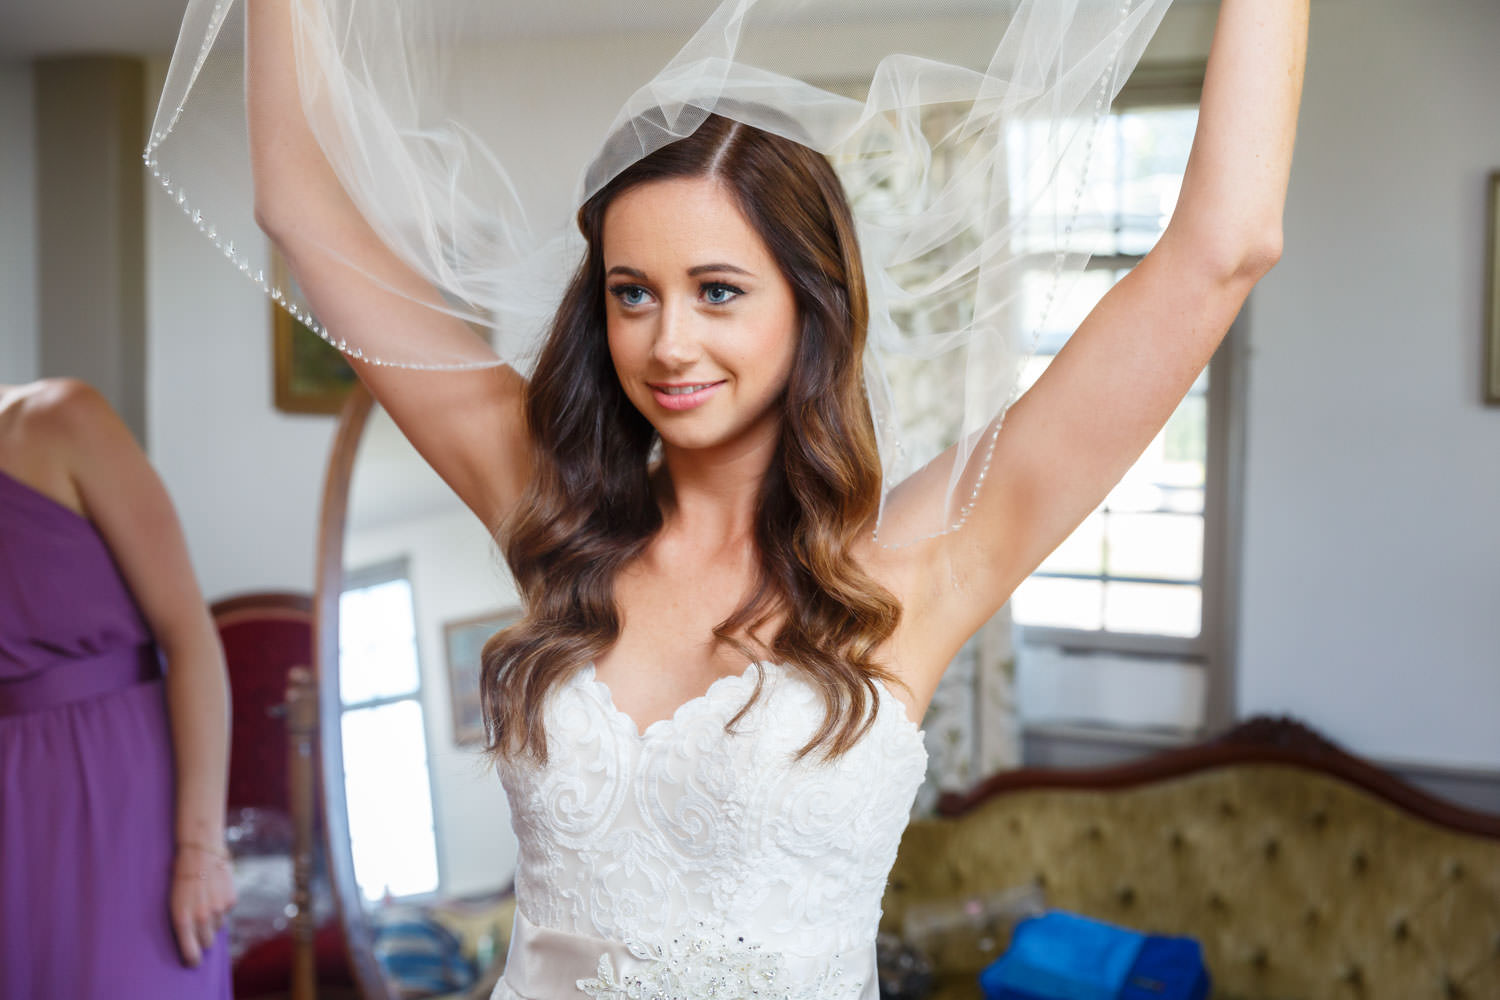 Bride playing with her veil in front of the mirror in the bridal suite. Acting playful and smiling